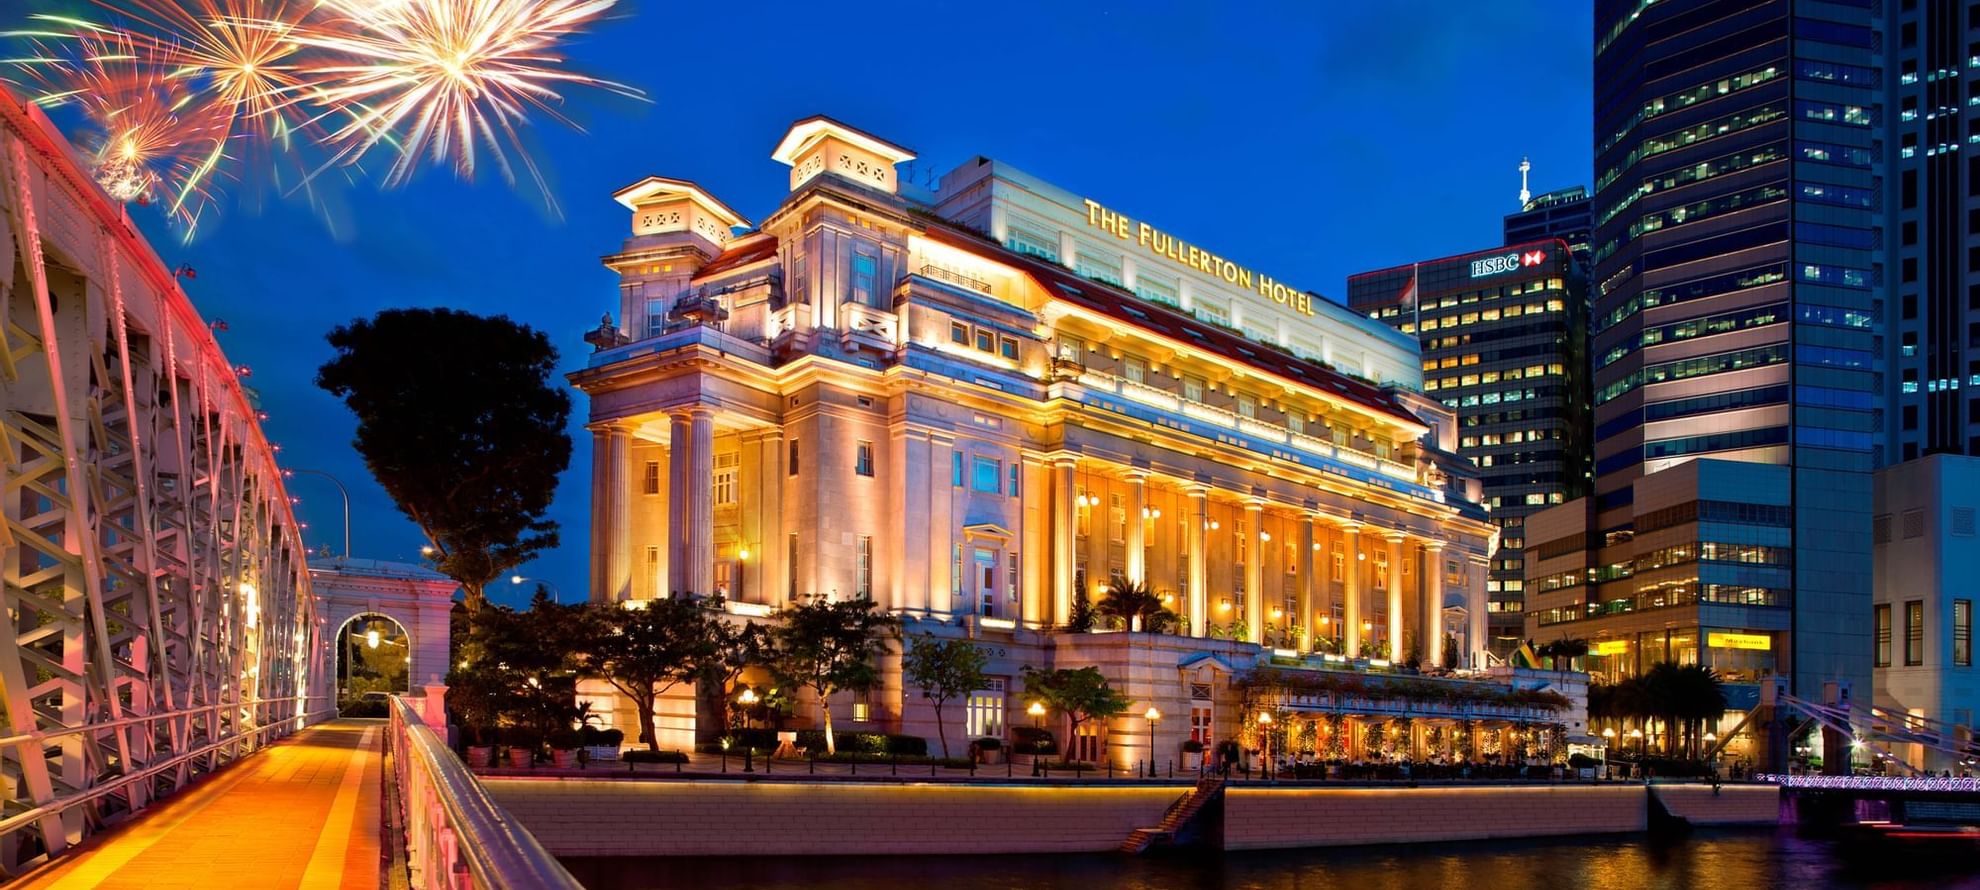 The exterior of The Fullerton Singapore with fireworks